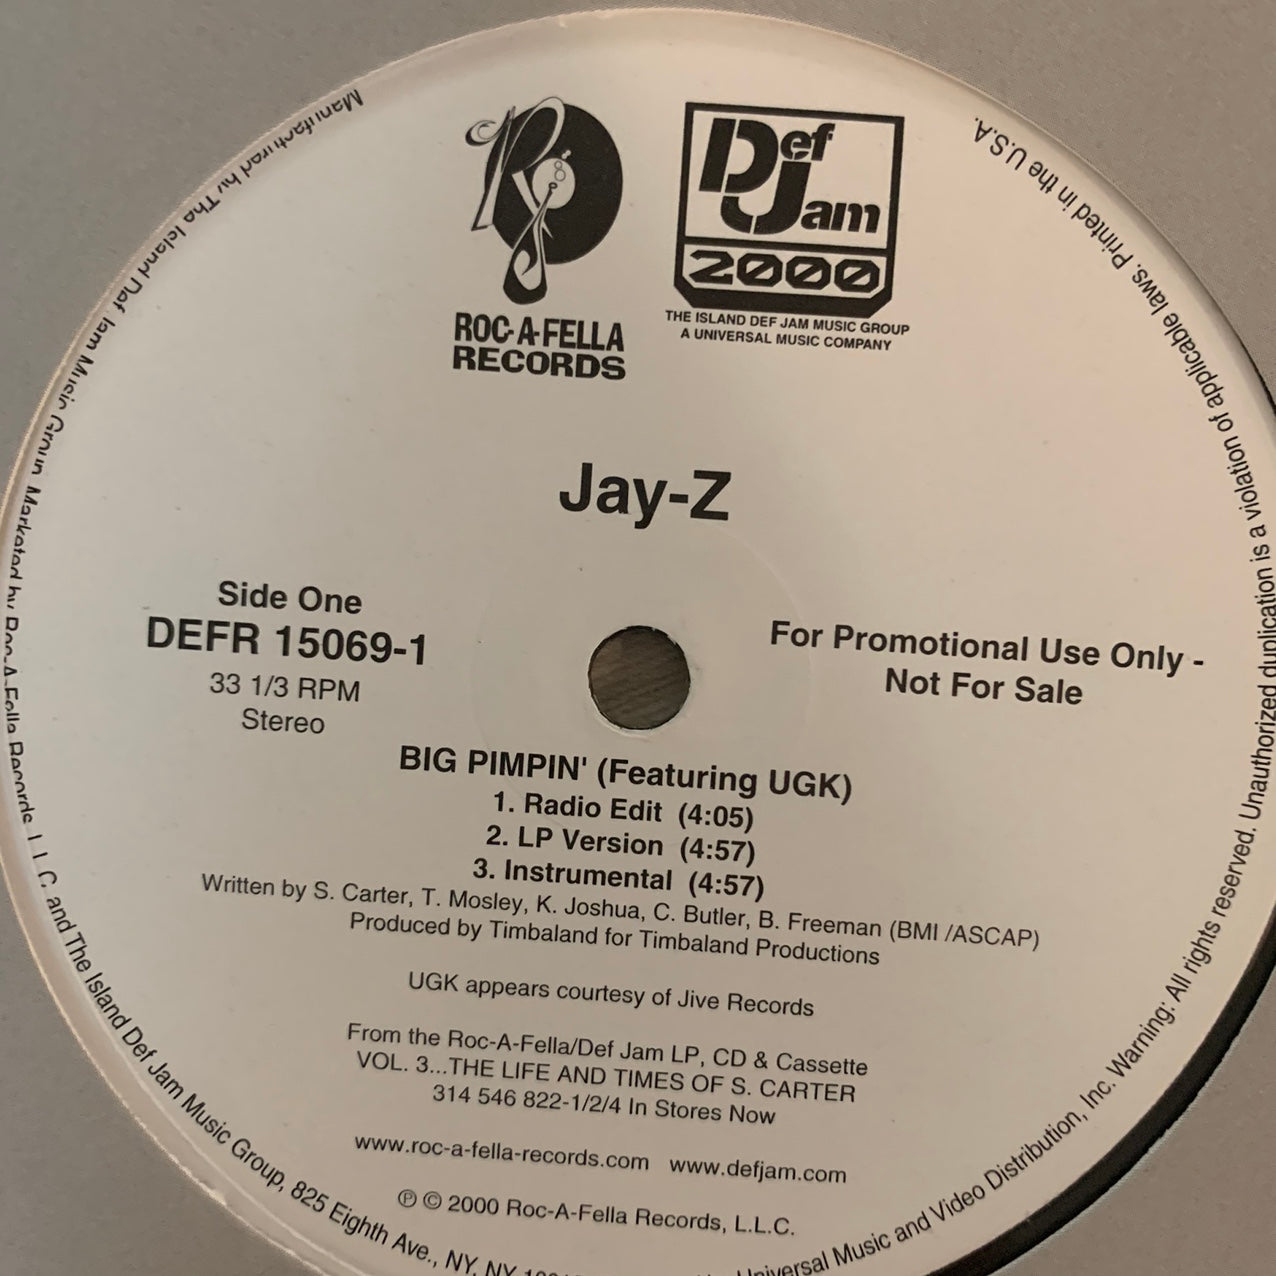 Jay-Z “Big Pimpin” / “Watch Me” Feat Dr Dre 6 Track 12inch Vinyl S 